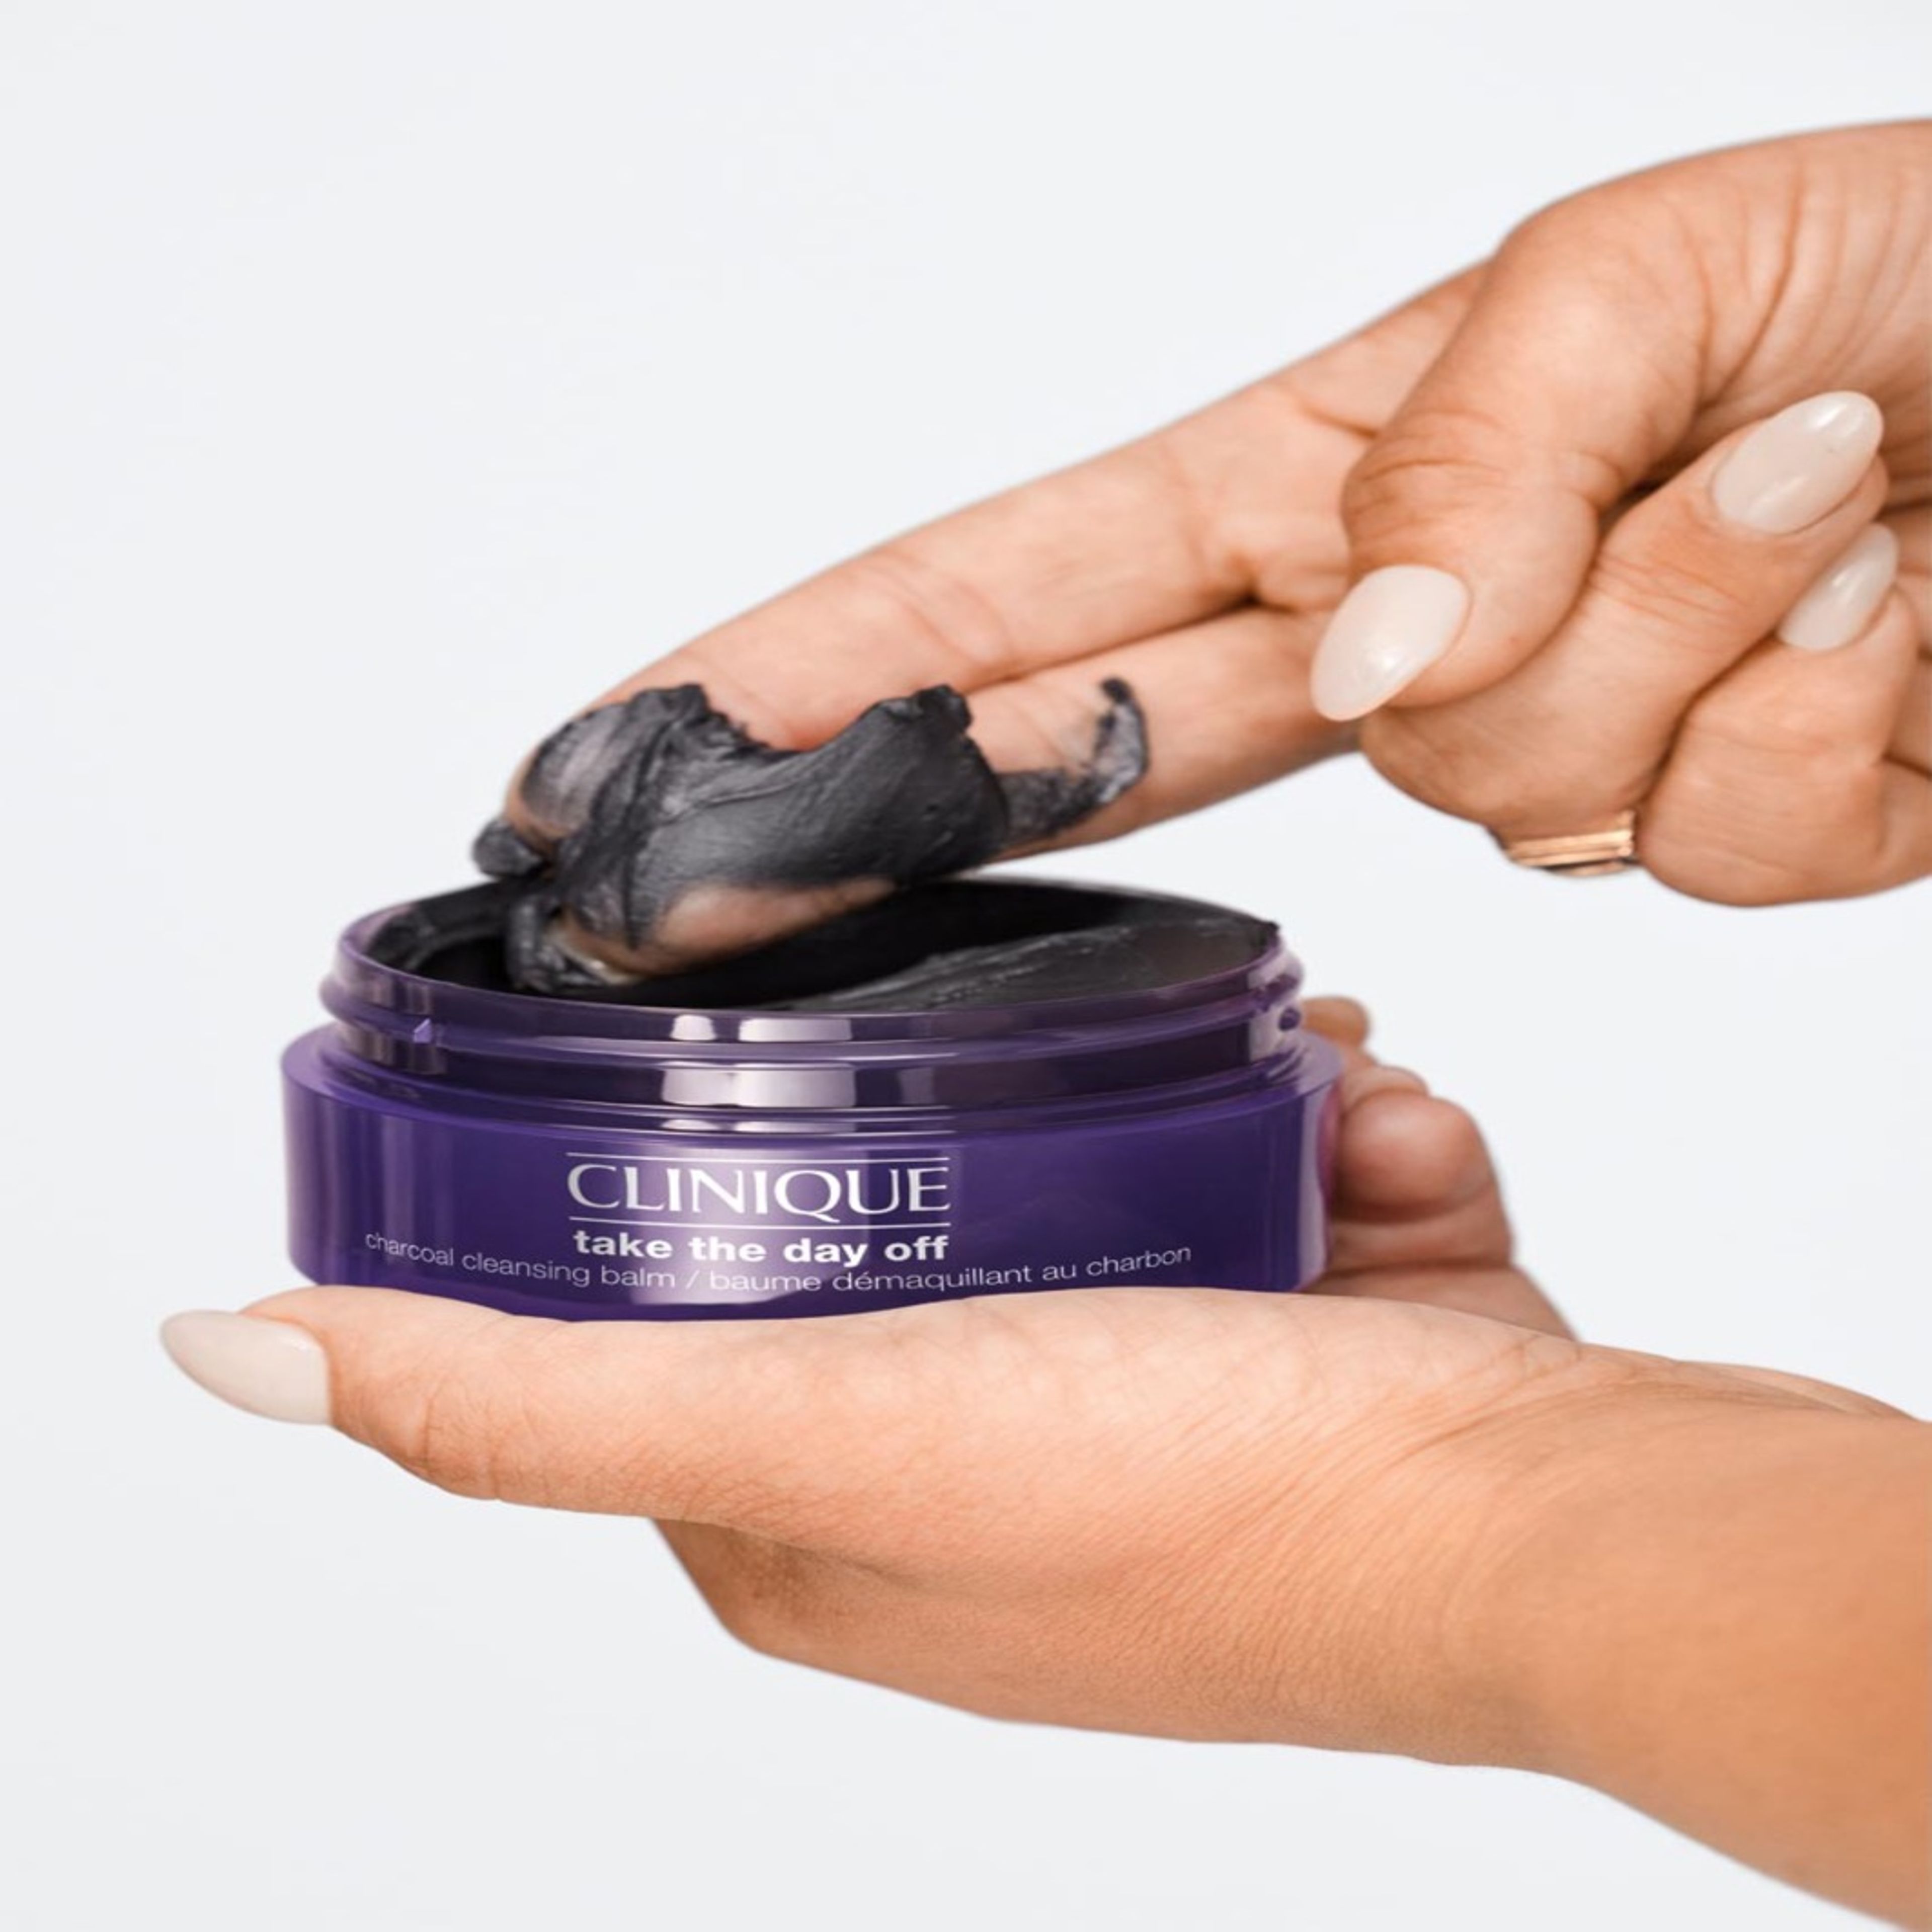 Clinique Take The Day Off™ Charcoal Cleansing Balm 7